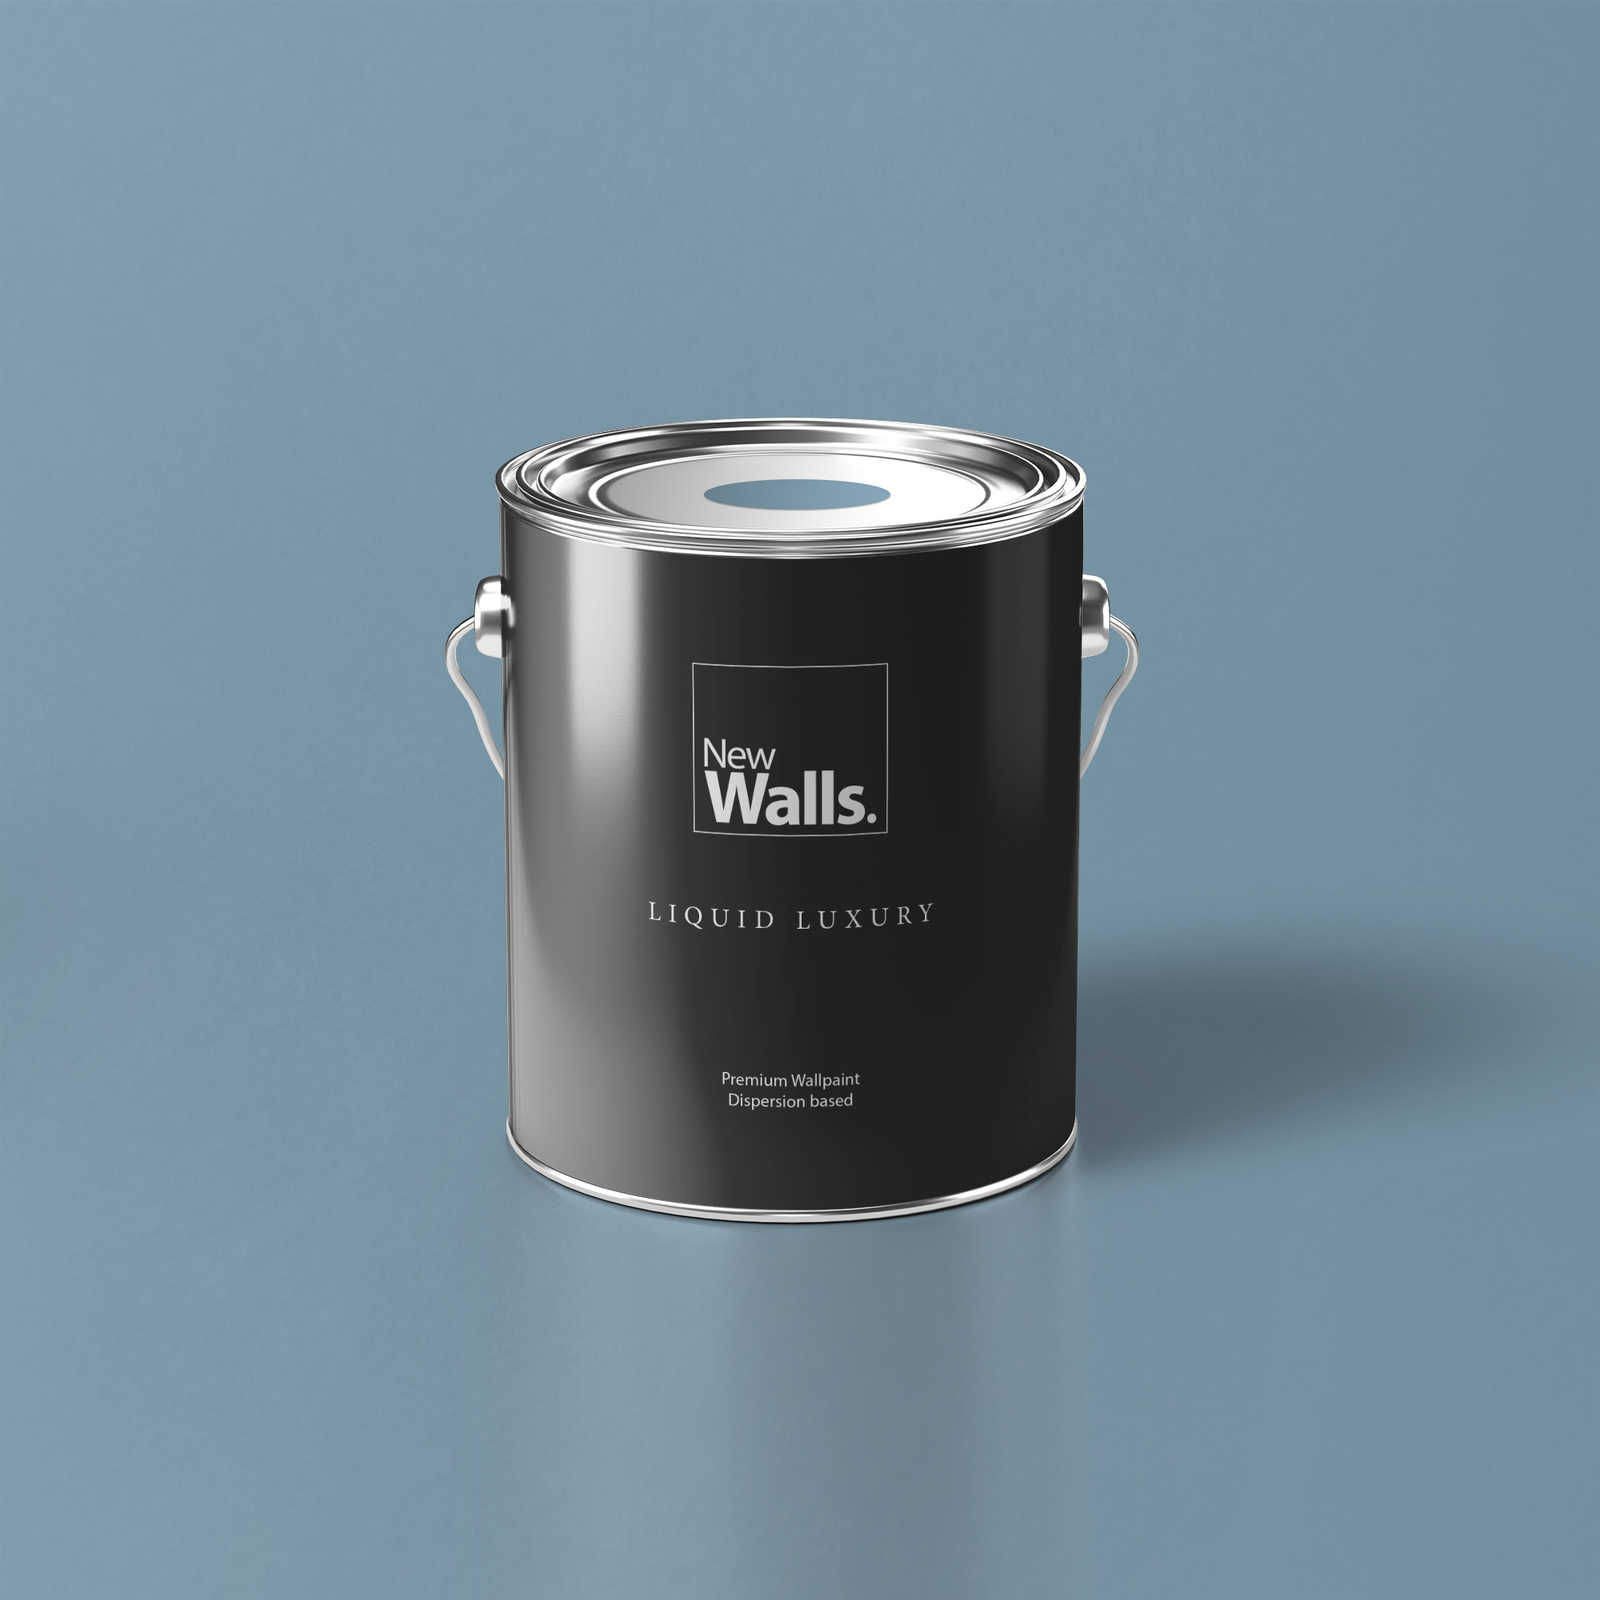 Premium Wall Paint Serene Nordic Blue »Blissful Blue« NW306 – 5 litre
